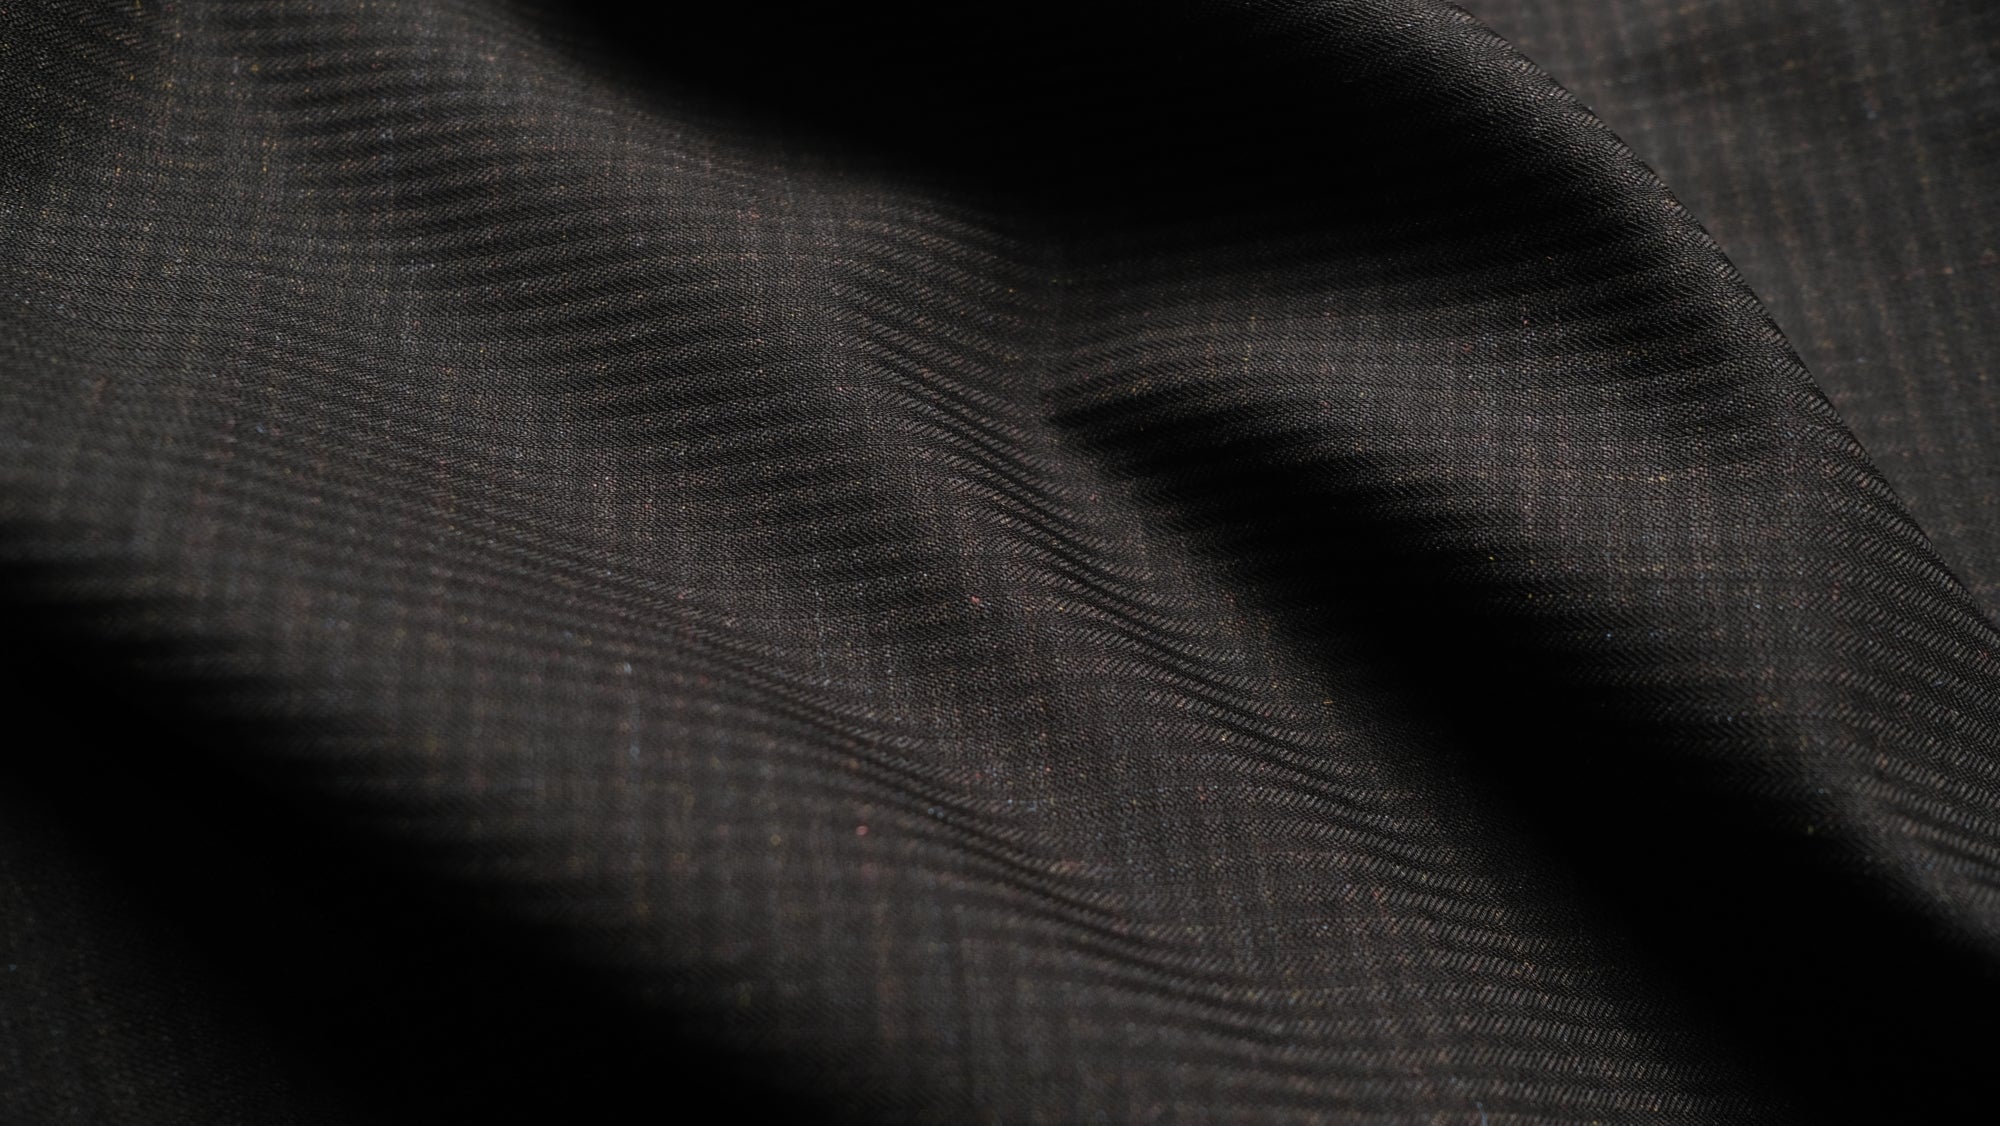 Black with Gold Microchecks Suiting Fabric